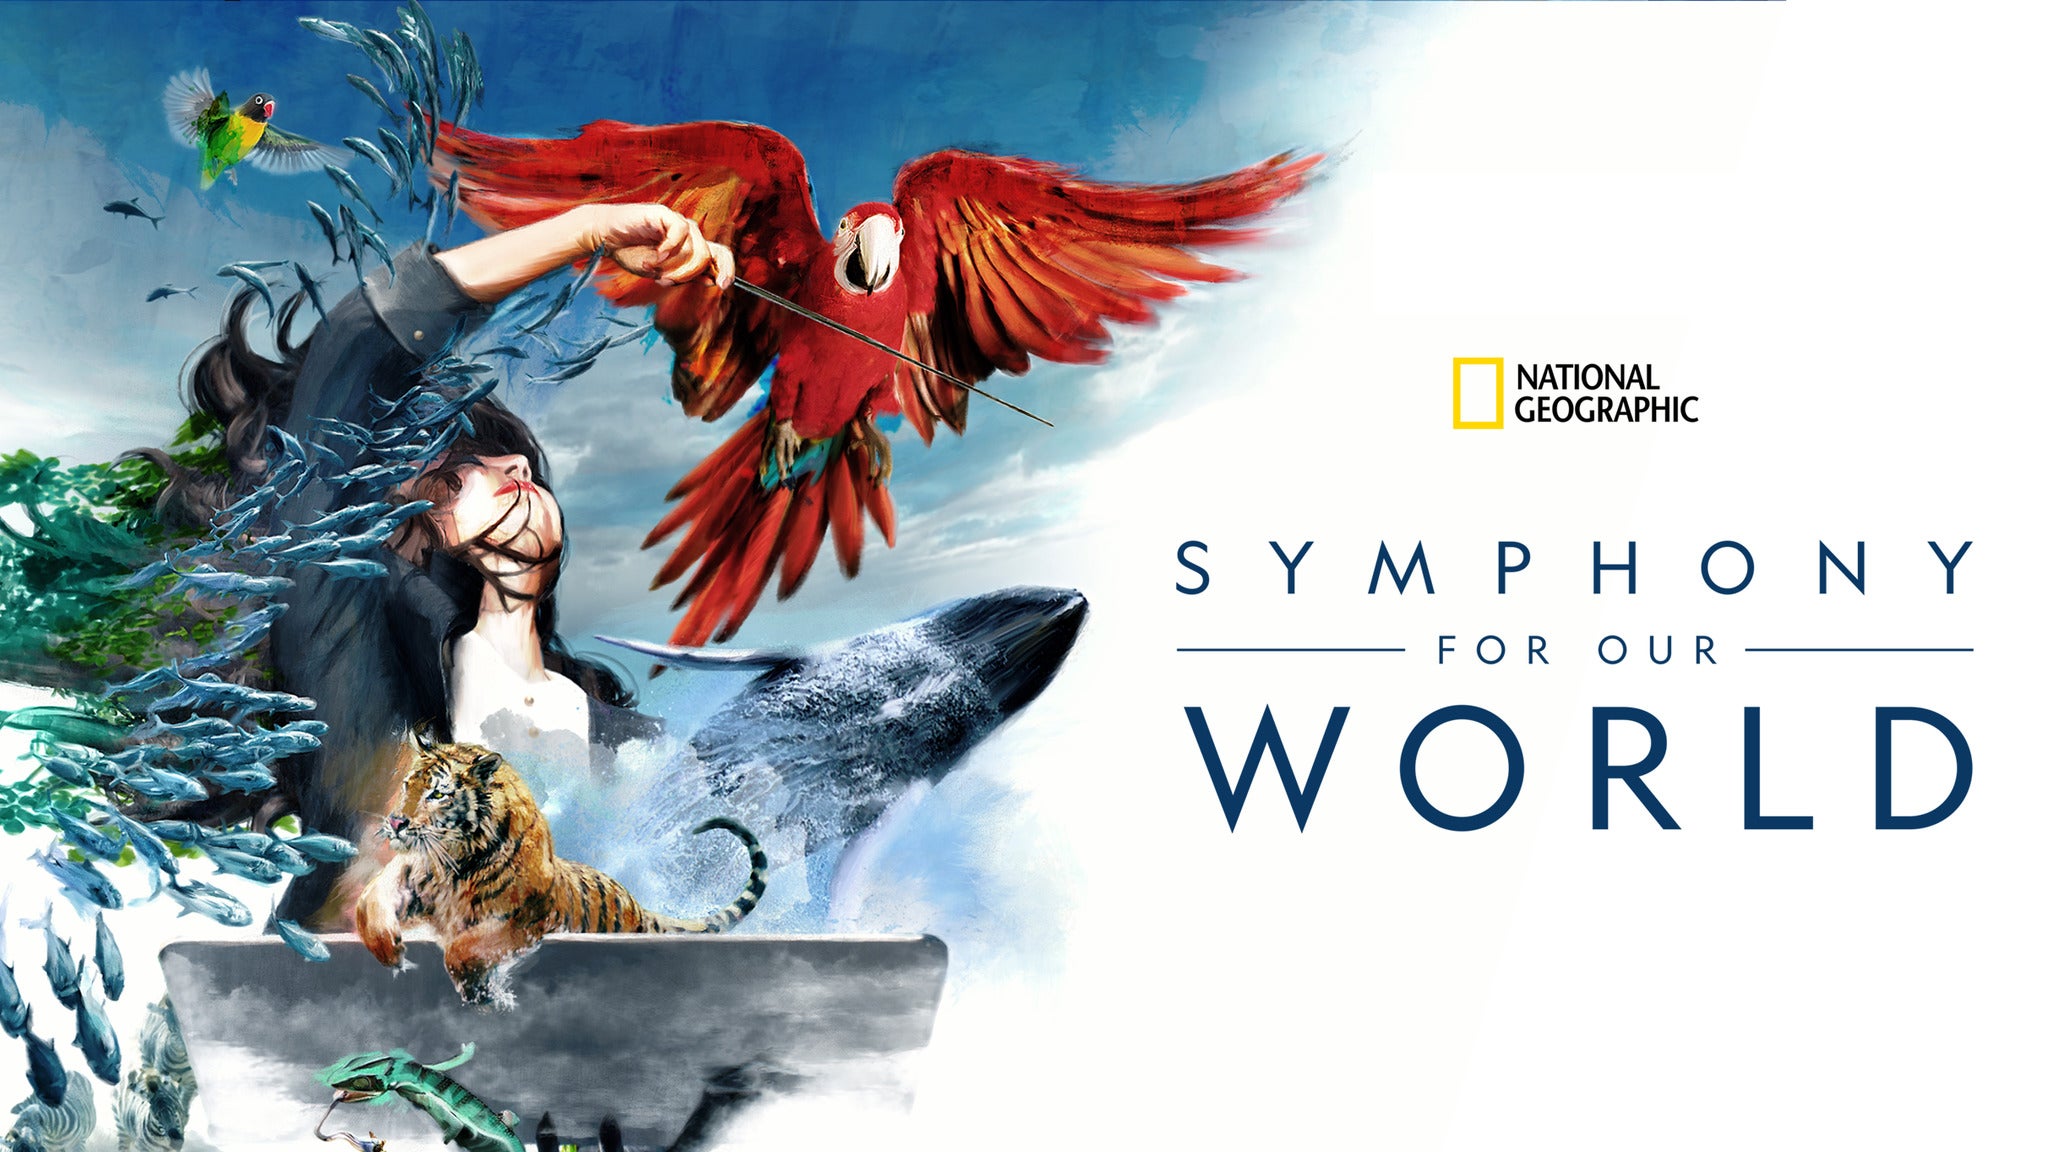 National Geographic: Symphony For Our World in Calgary promo photo for Internet presale offer code